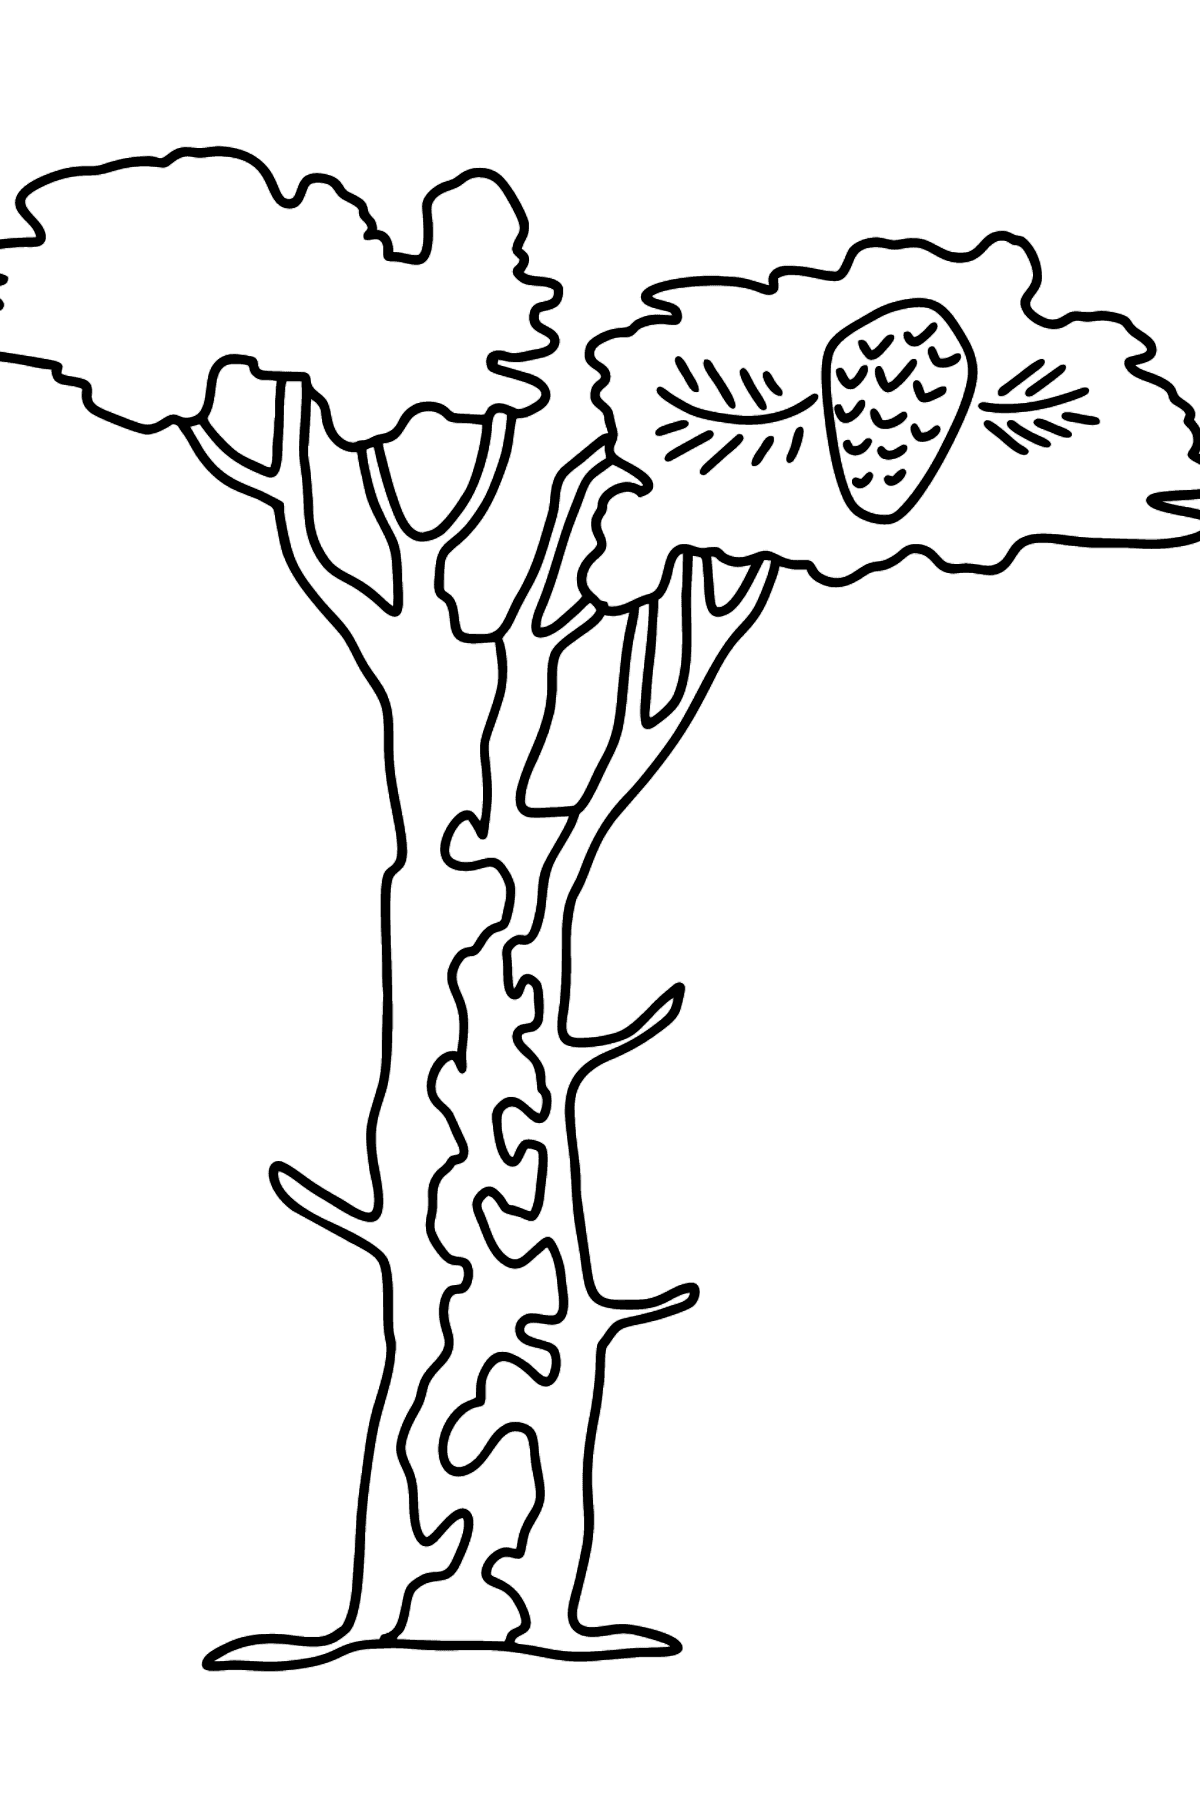 Cedar Tree coloring page - Coloring Pages for Kids